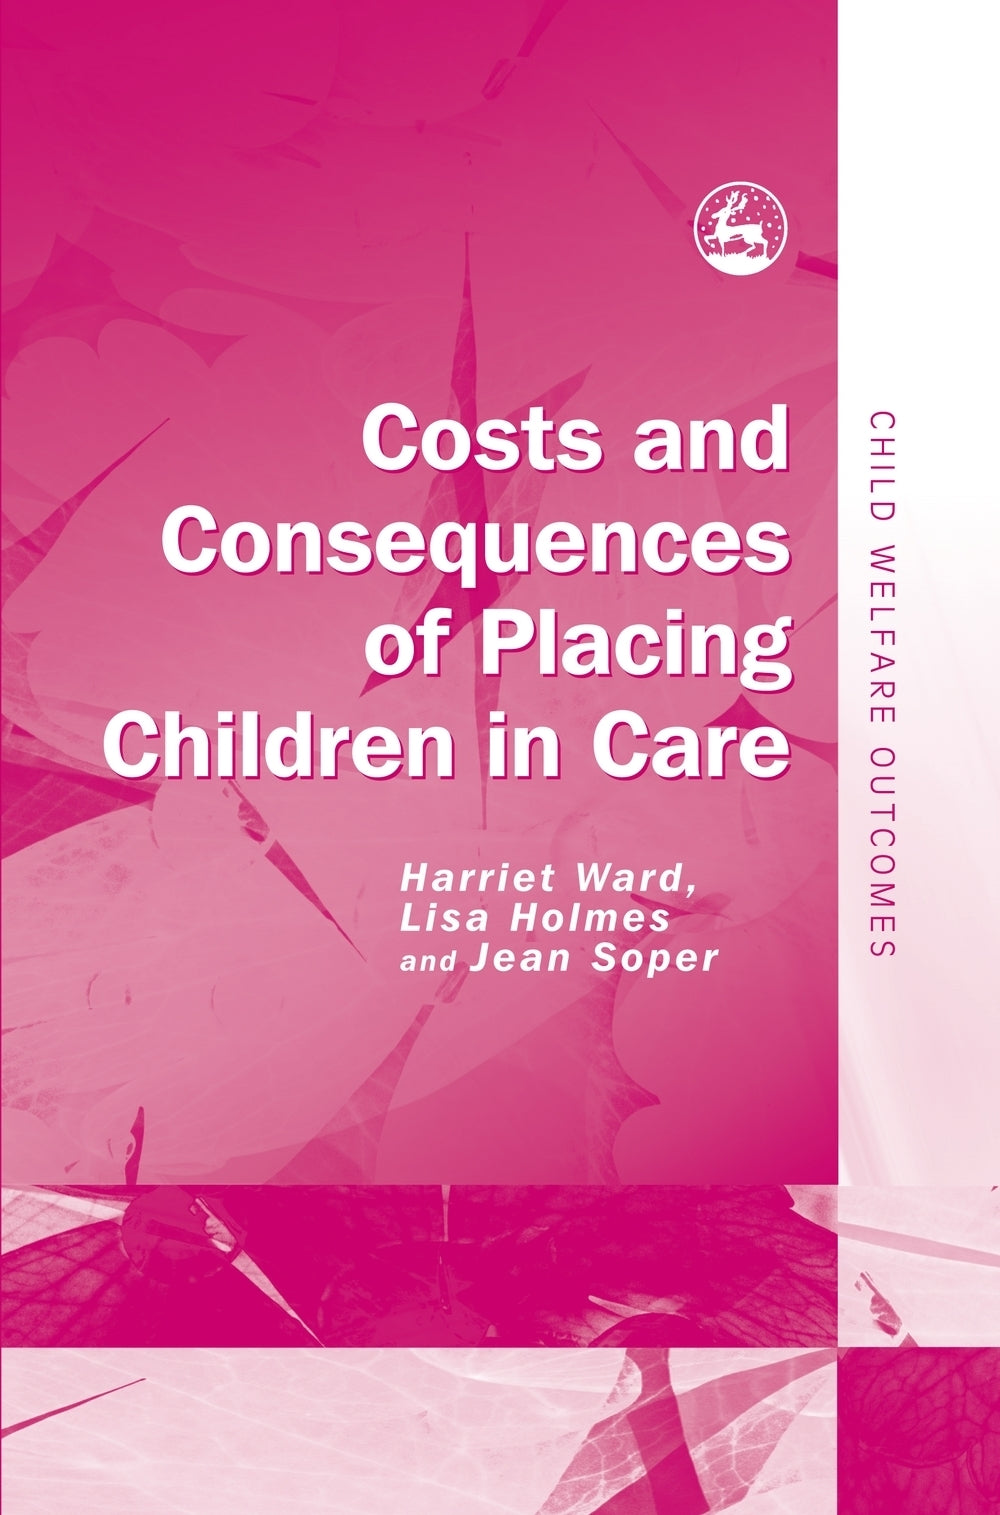 Costs and Consequences of Placing Children in Care by Lisa Holmes, Jean Soper, Harriet Ward, Richard Olsen